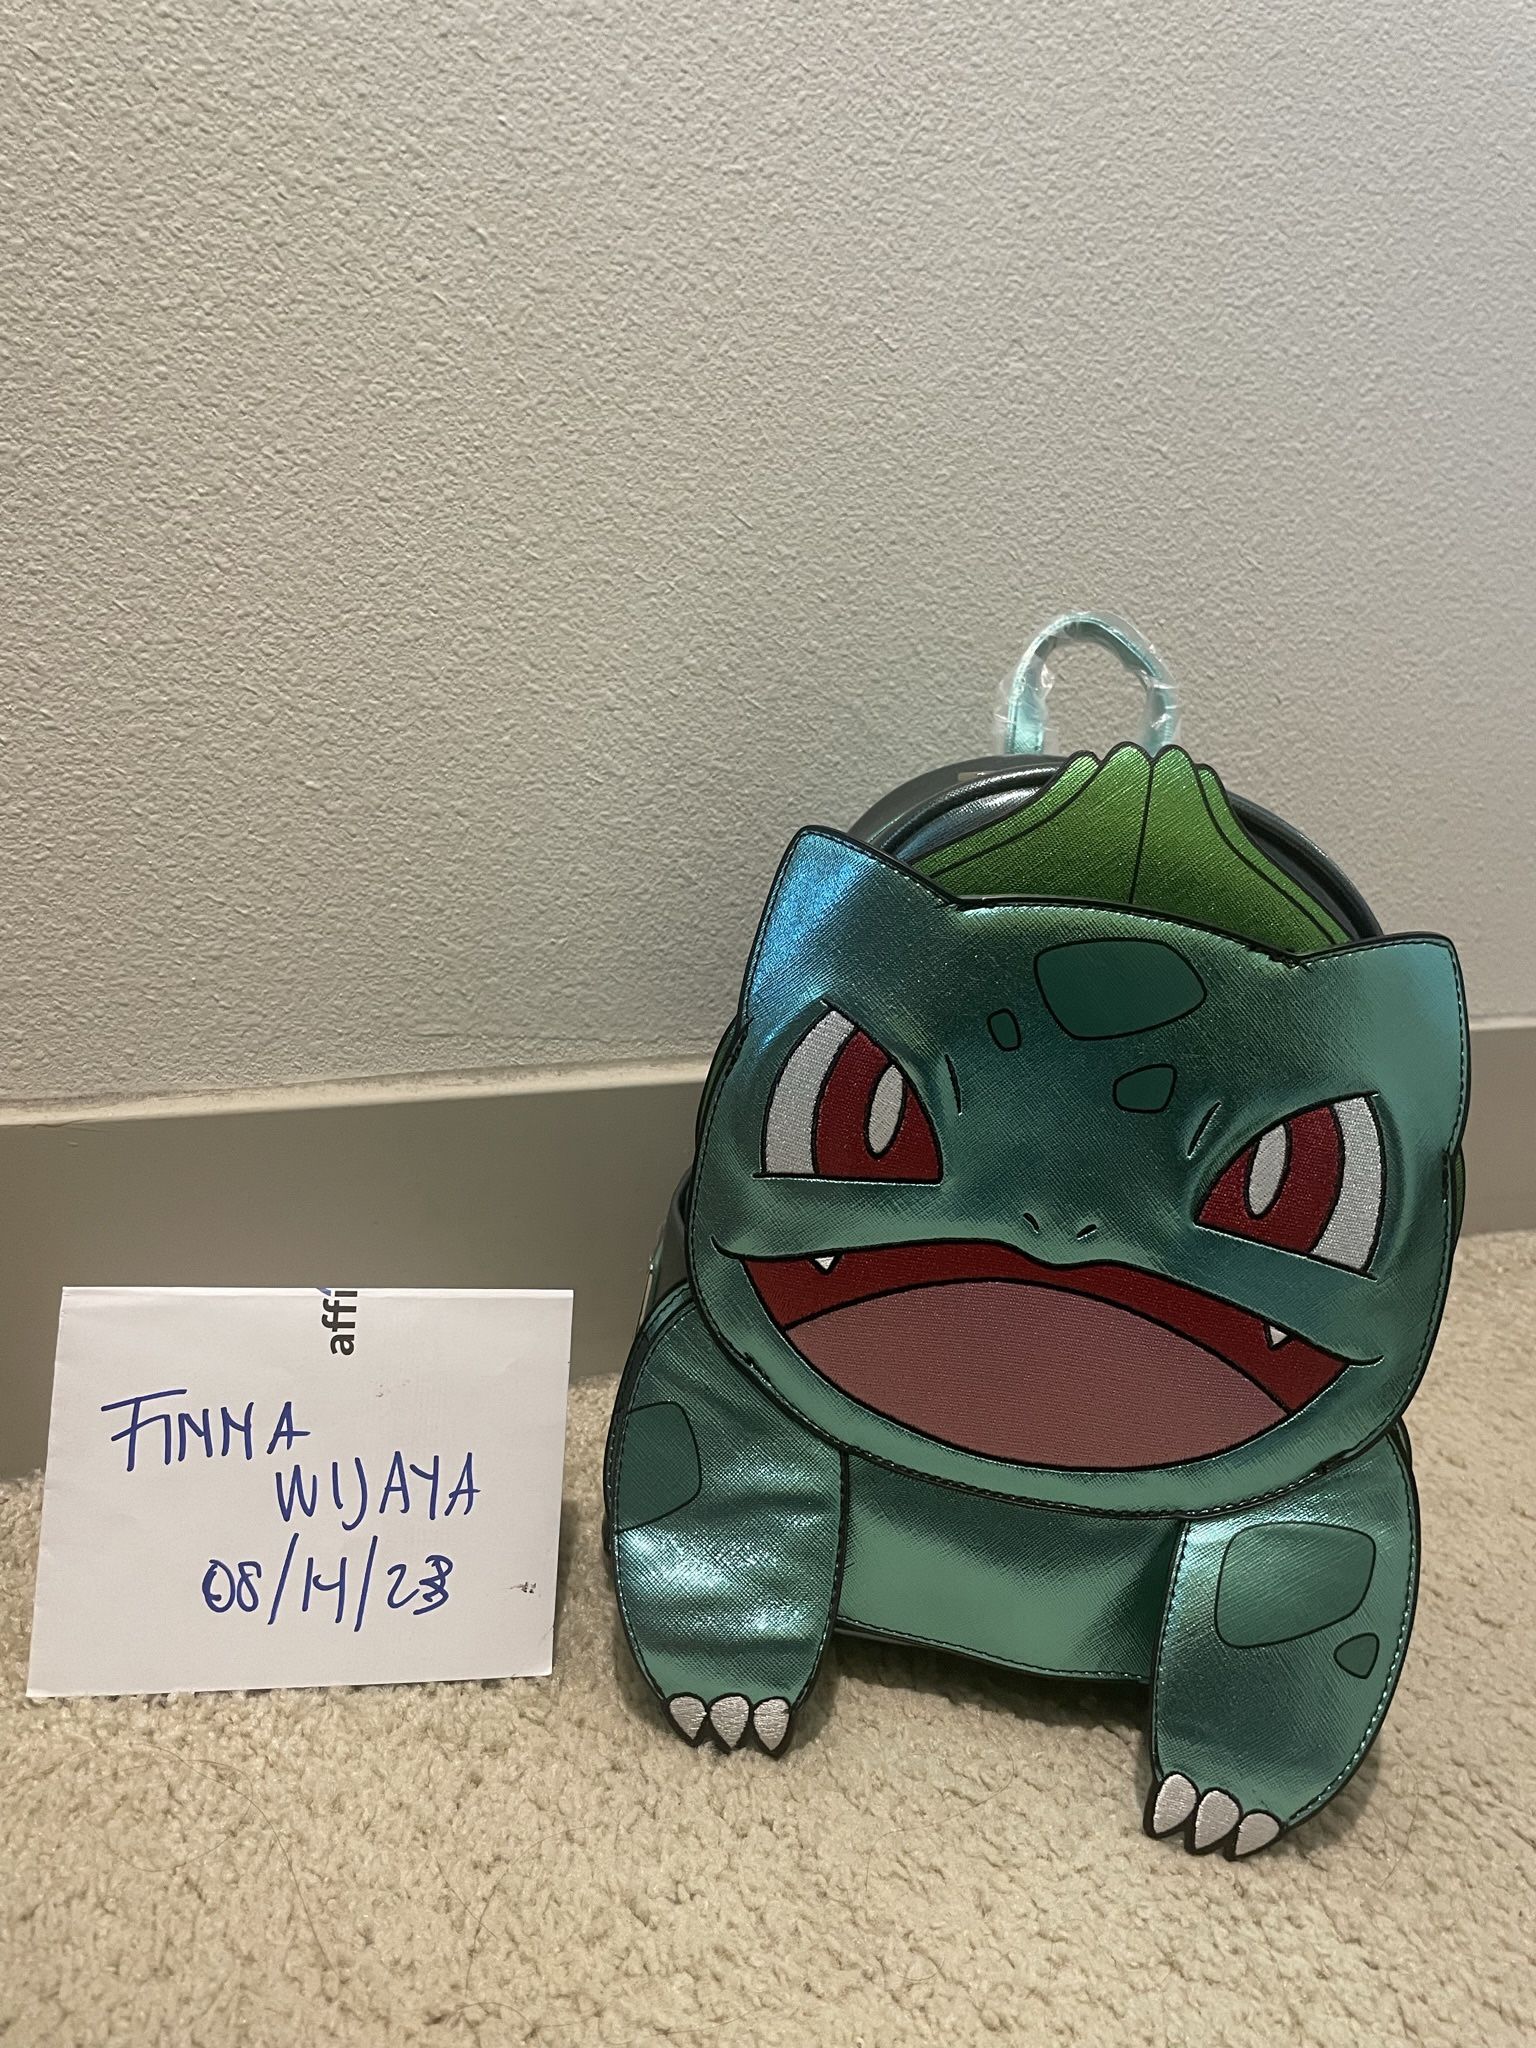 Bulbasaur Loungefly Pokemon for Sale in Irvine, CA - OfferUp